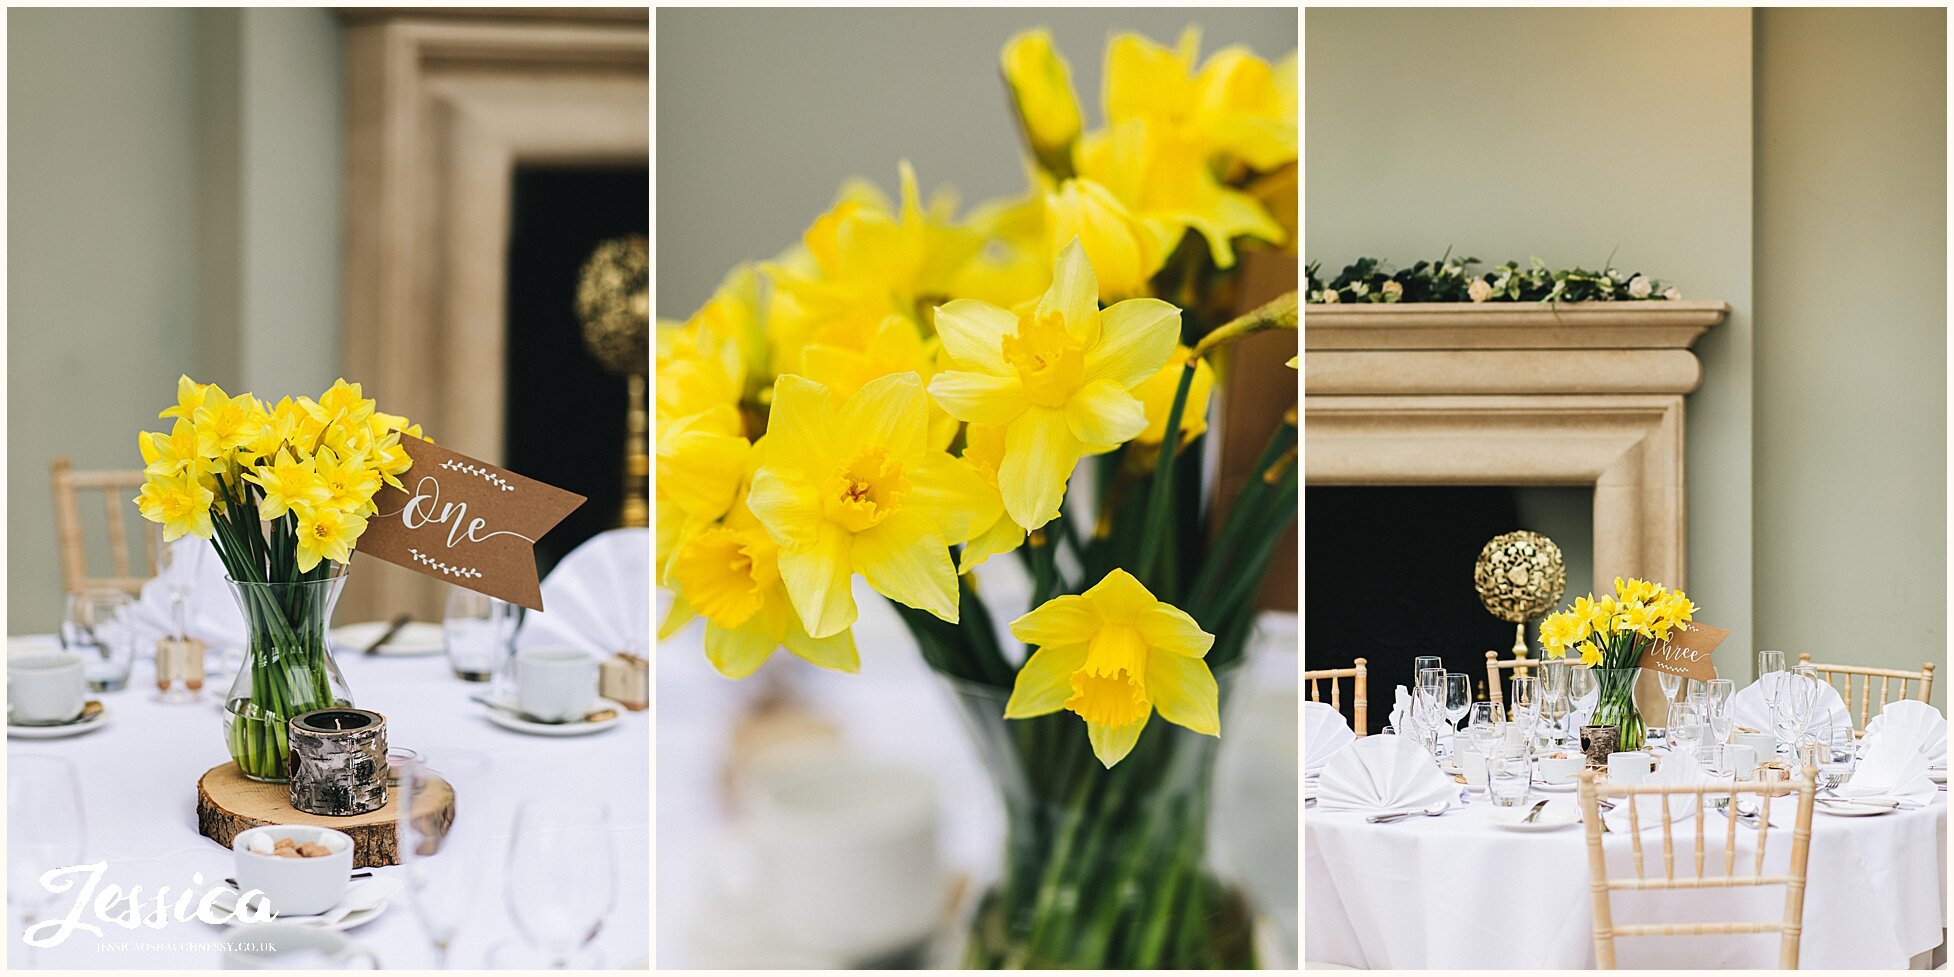 daffodils decorate the tables for the spring wedding